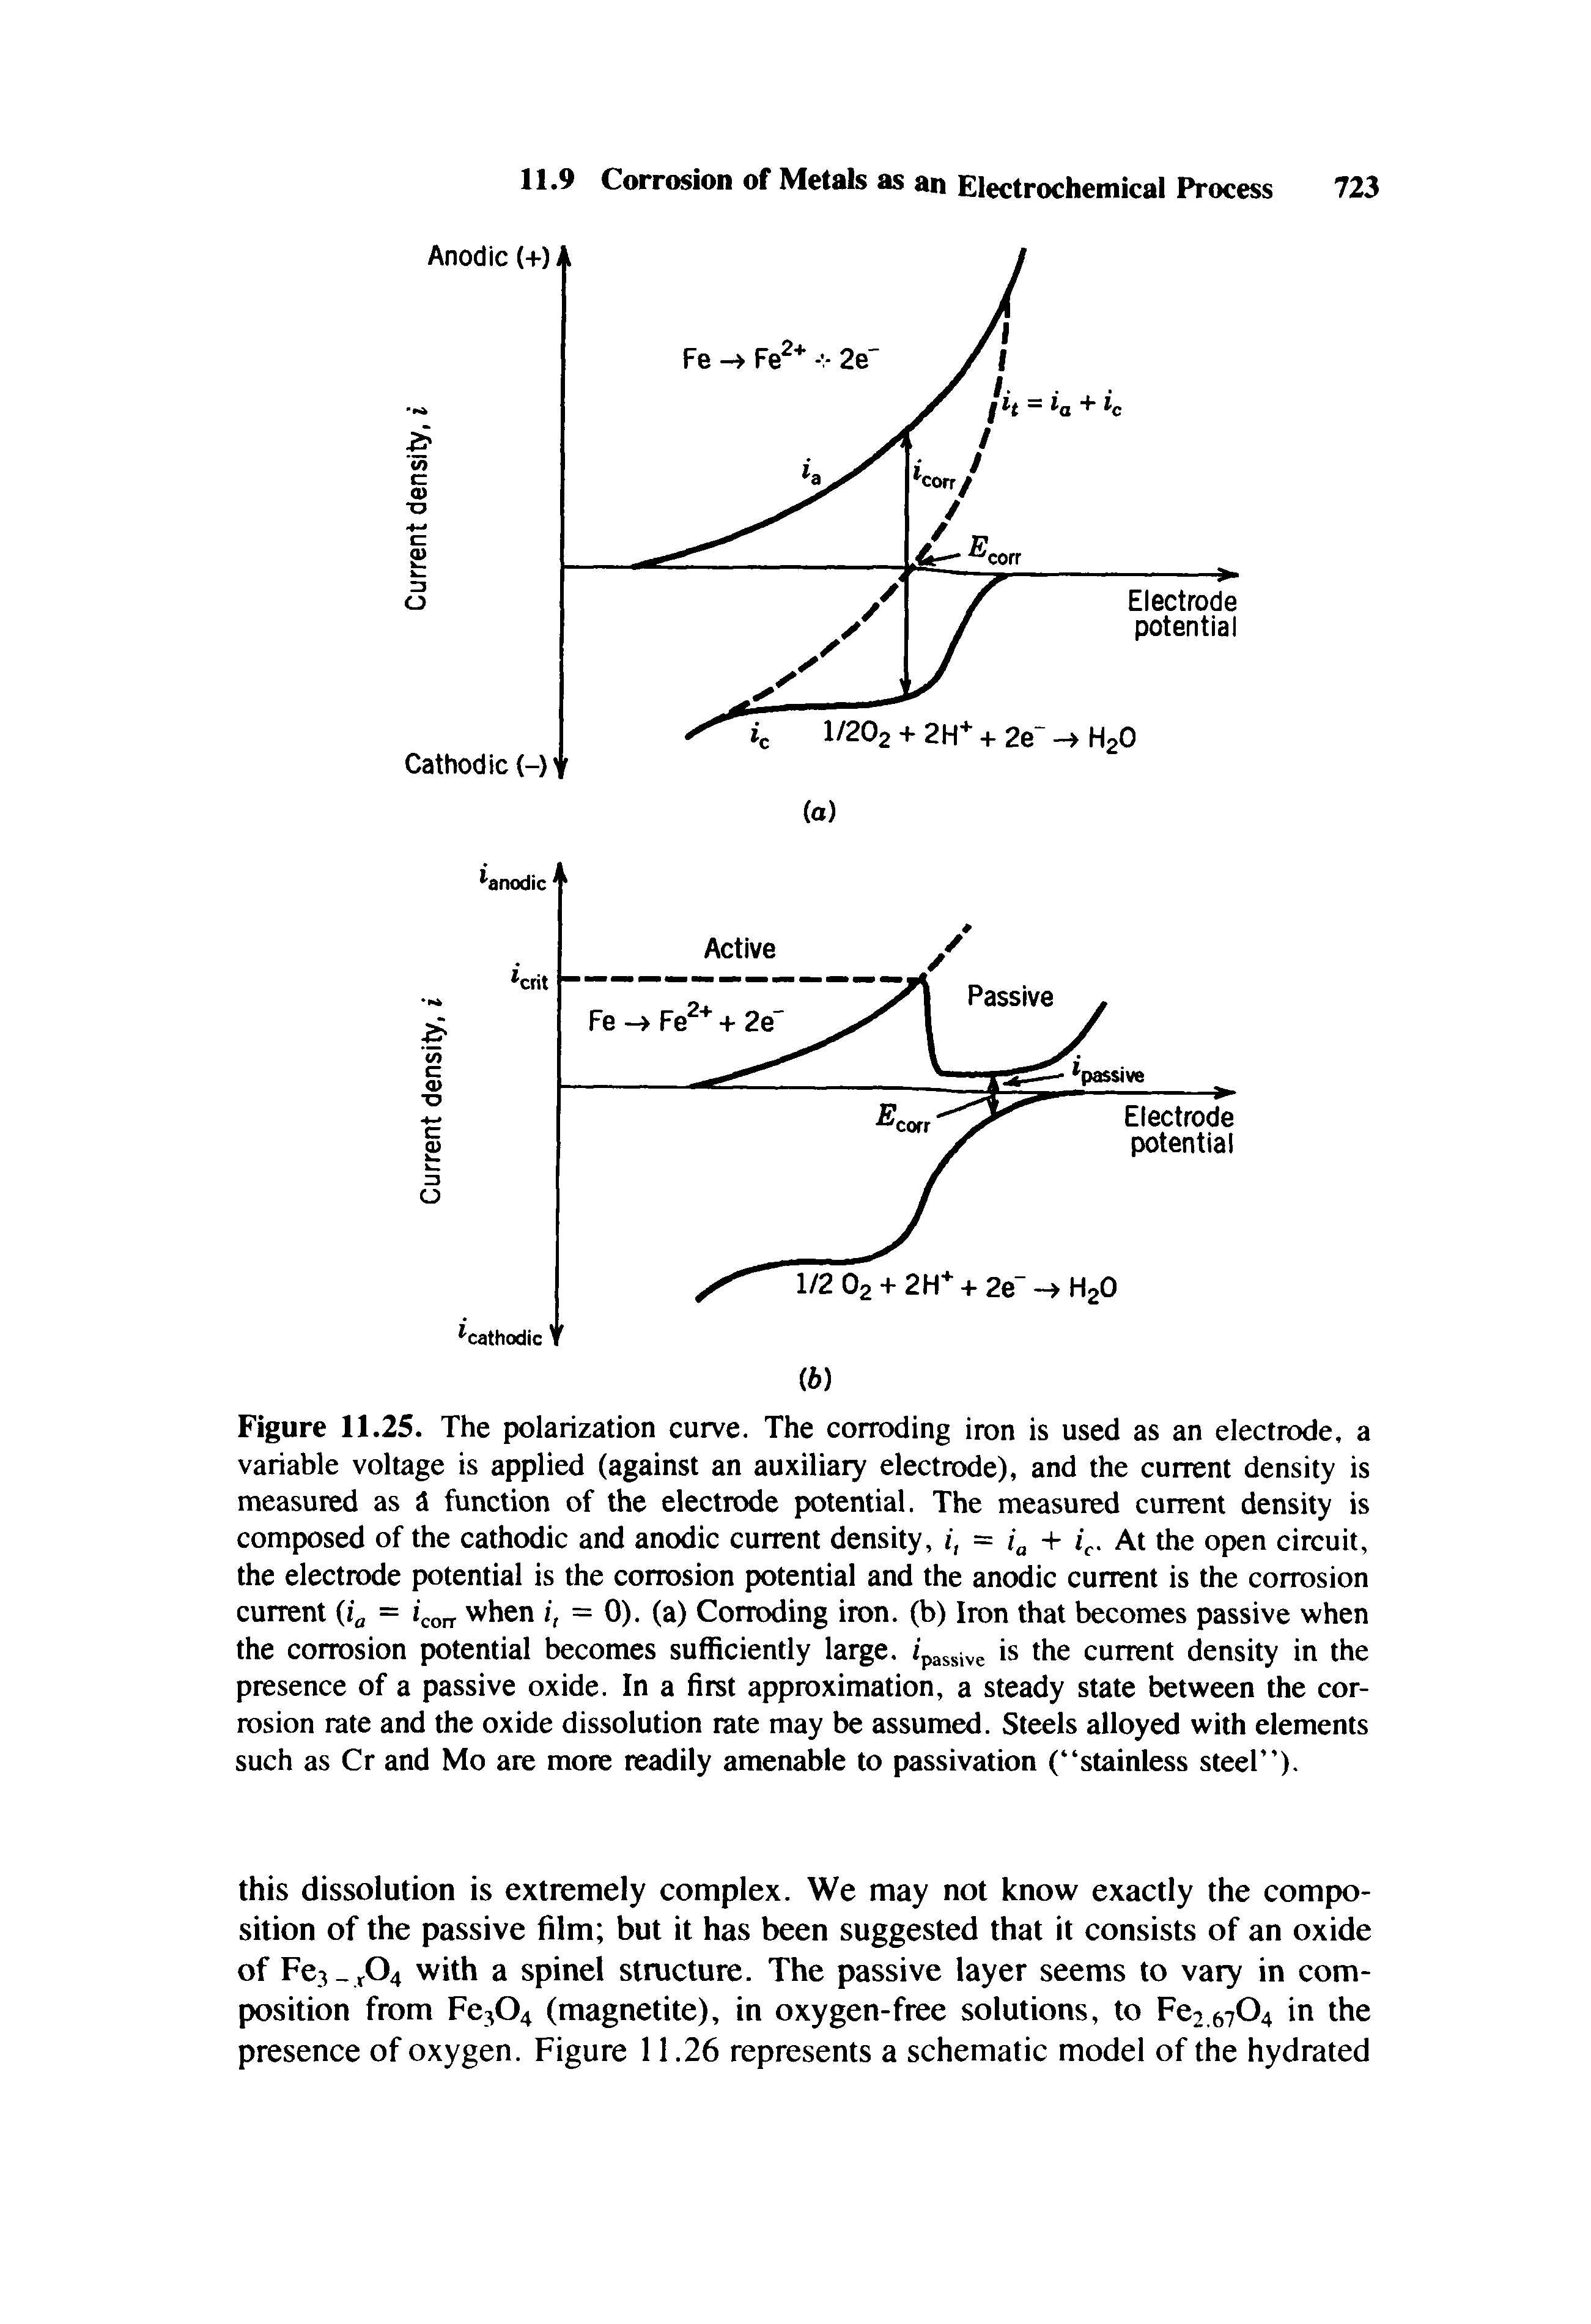 Figure 11.25. The polarization curve. The corroding iron is used as an electrode, a variable voltage is applied (against an auxiliary electrode), and the current density is measured as cl function of the electrode potential. The measured current density is composed of the cathodic and anodic current density, i, = At the open circuit,...